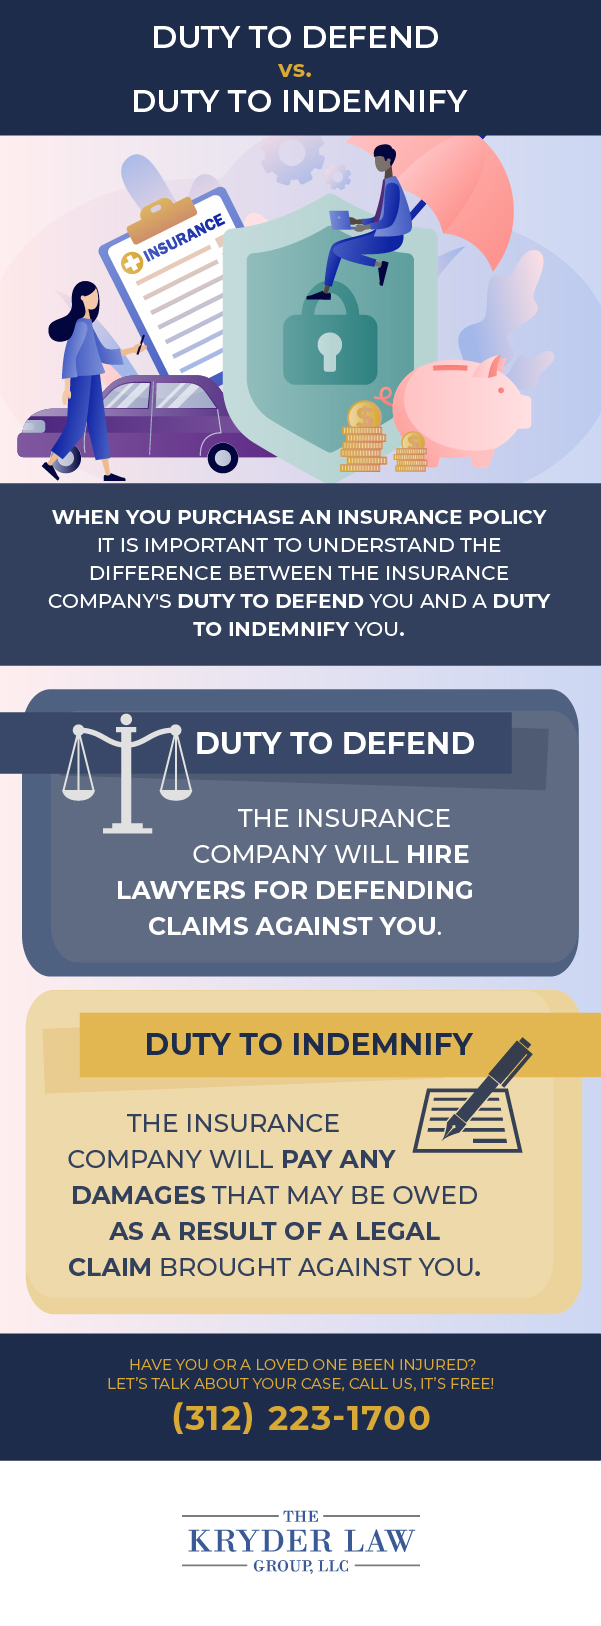 Duty to Defend vs. Duty to Indemnify